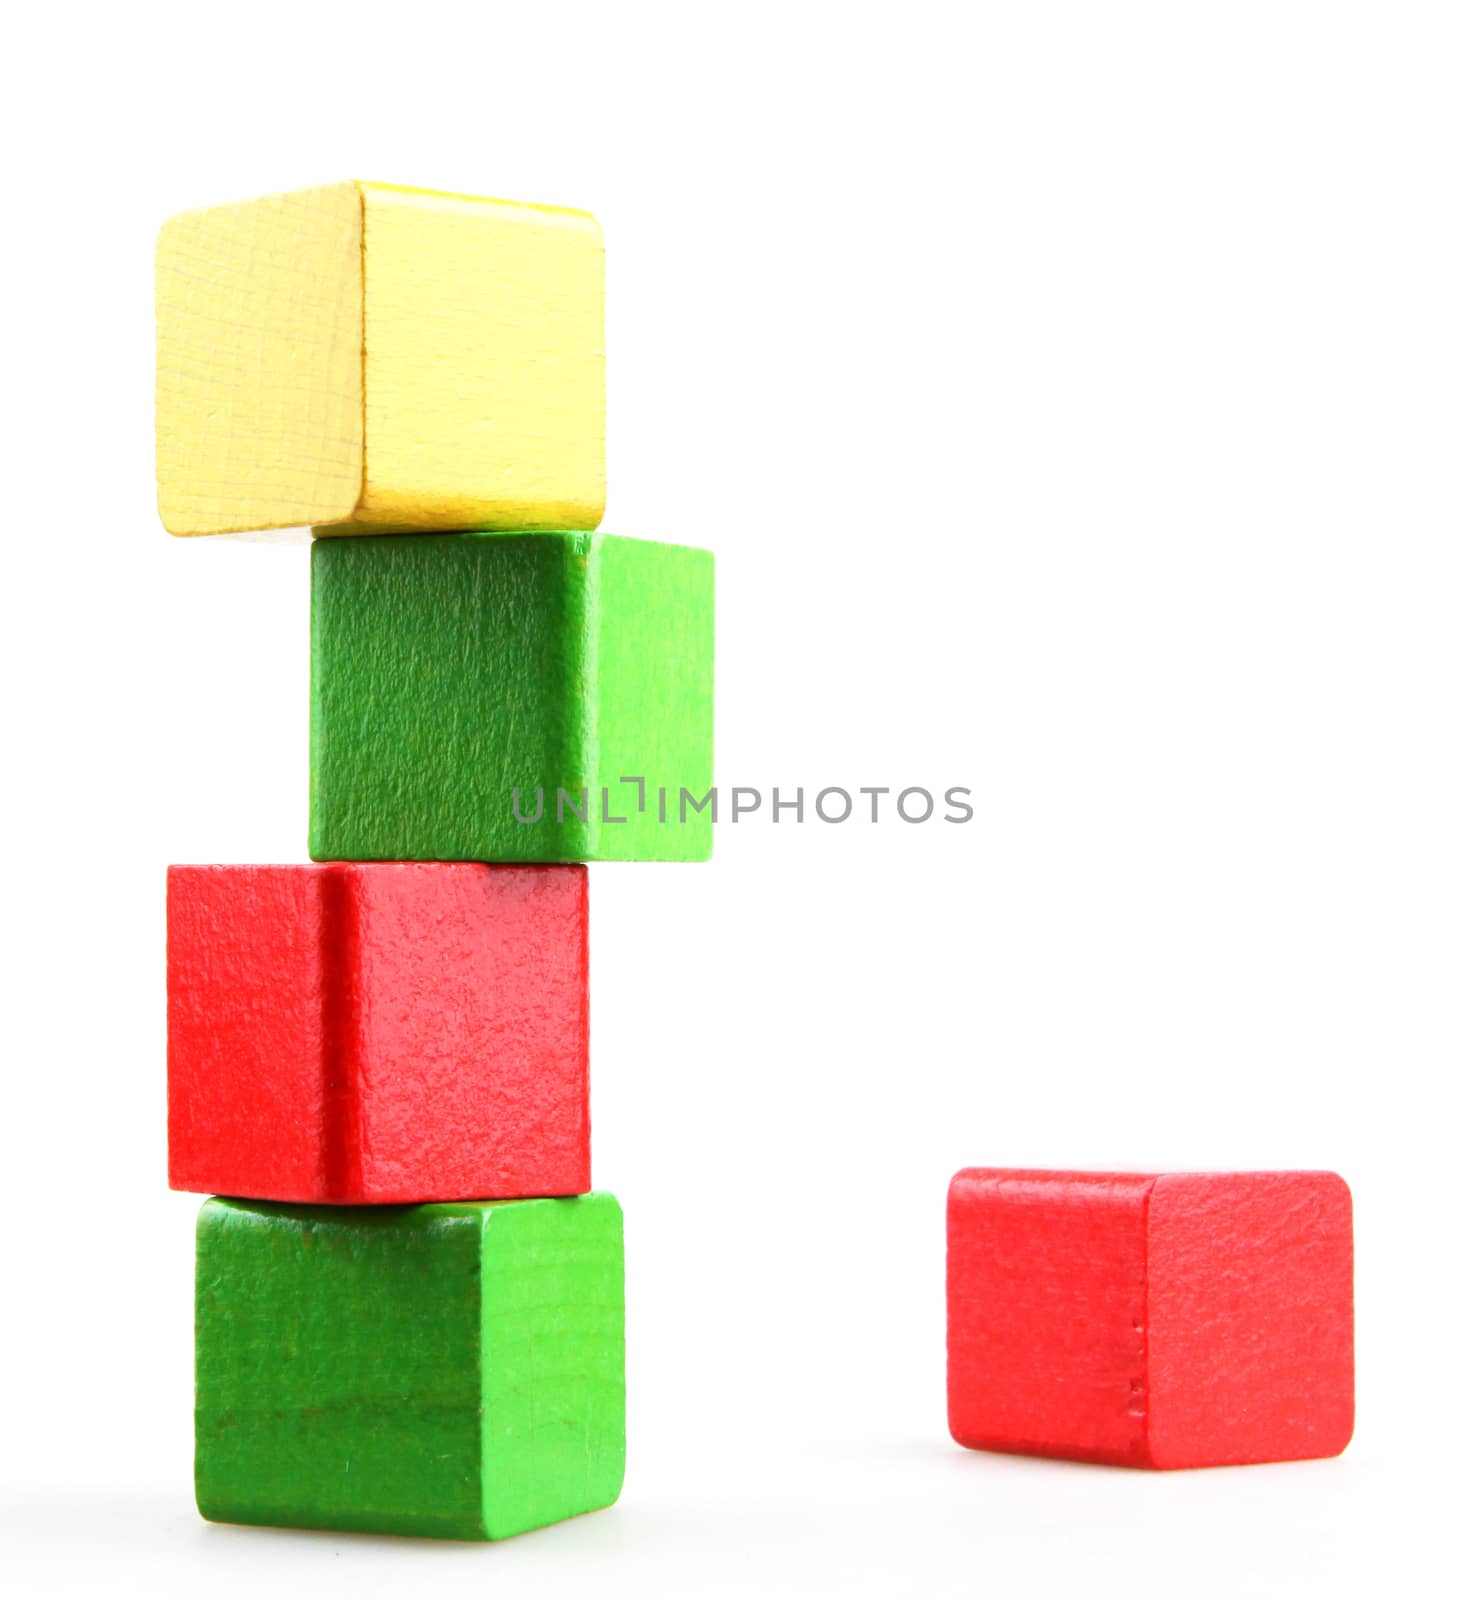 Colorful Wooden Building Blocks Toys by nenovbrothers